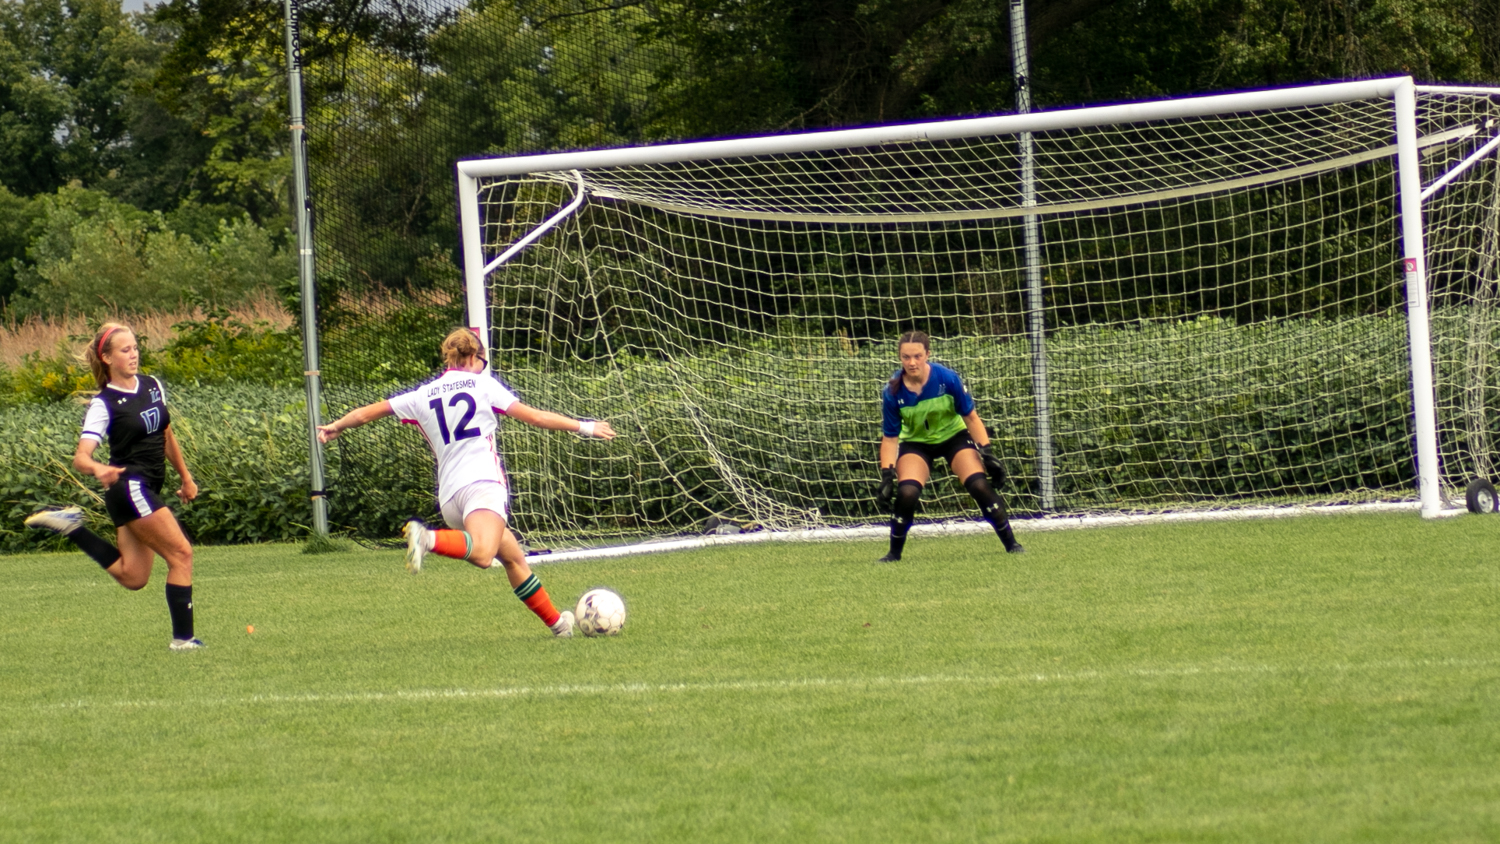 Kearsty Nielson scores a goal against Lewis and Clark